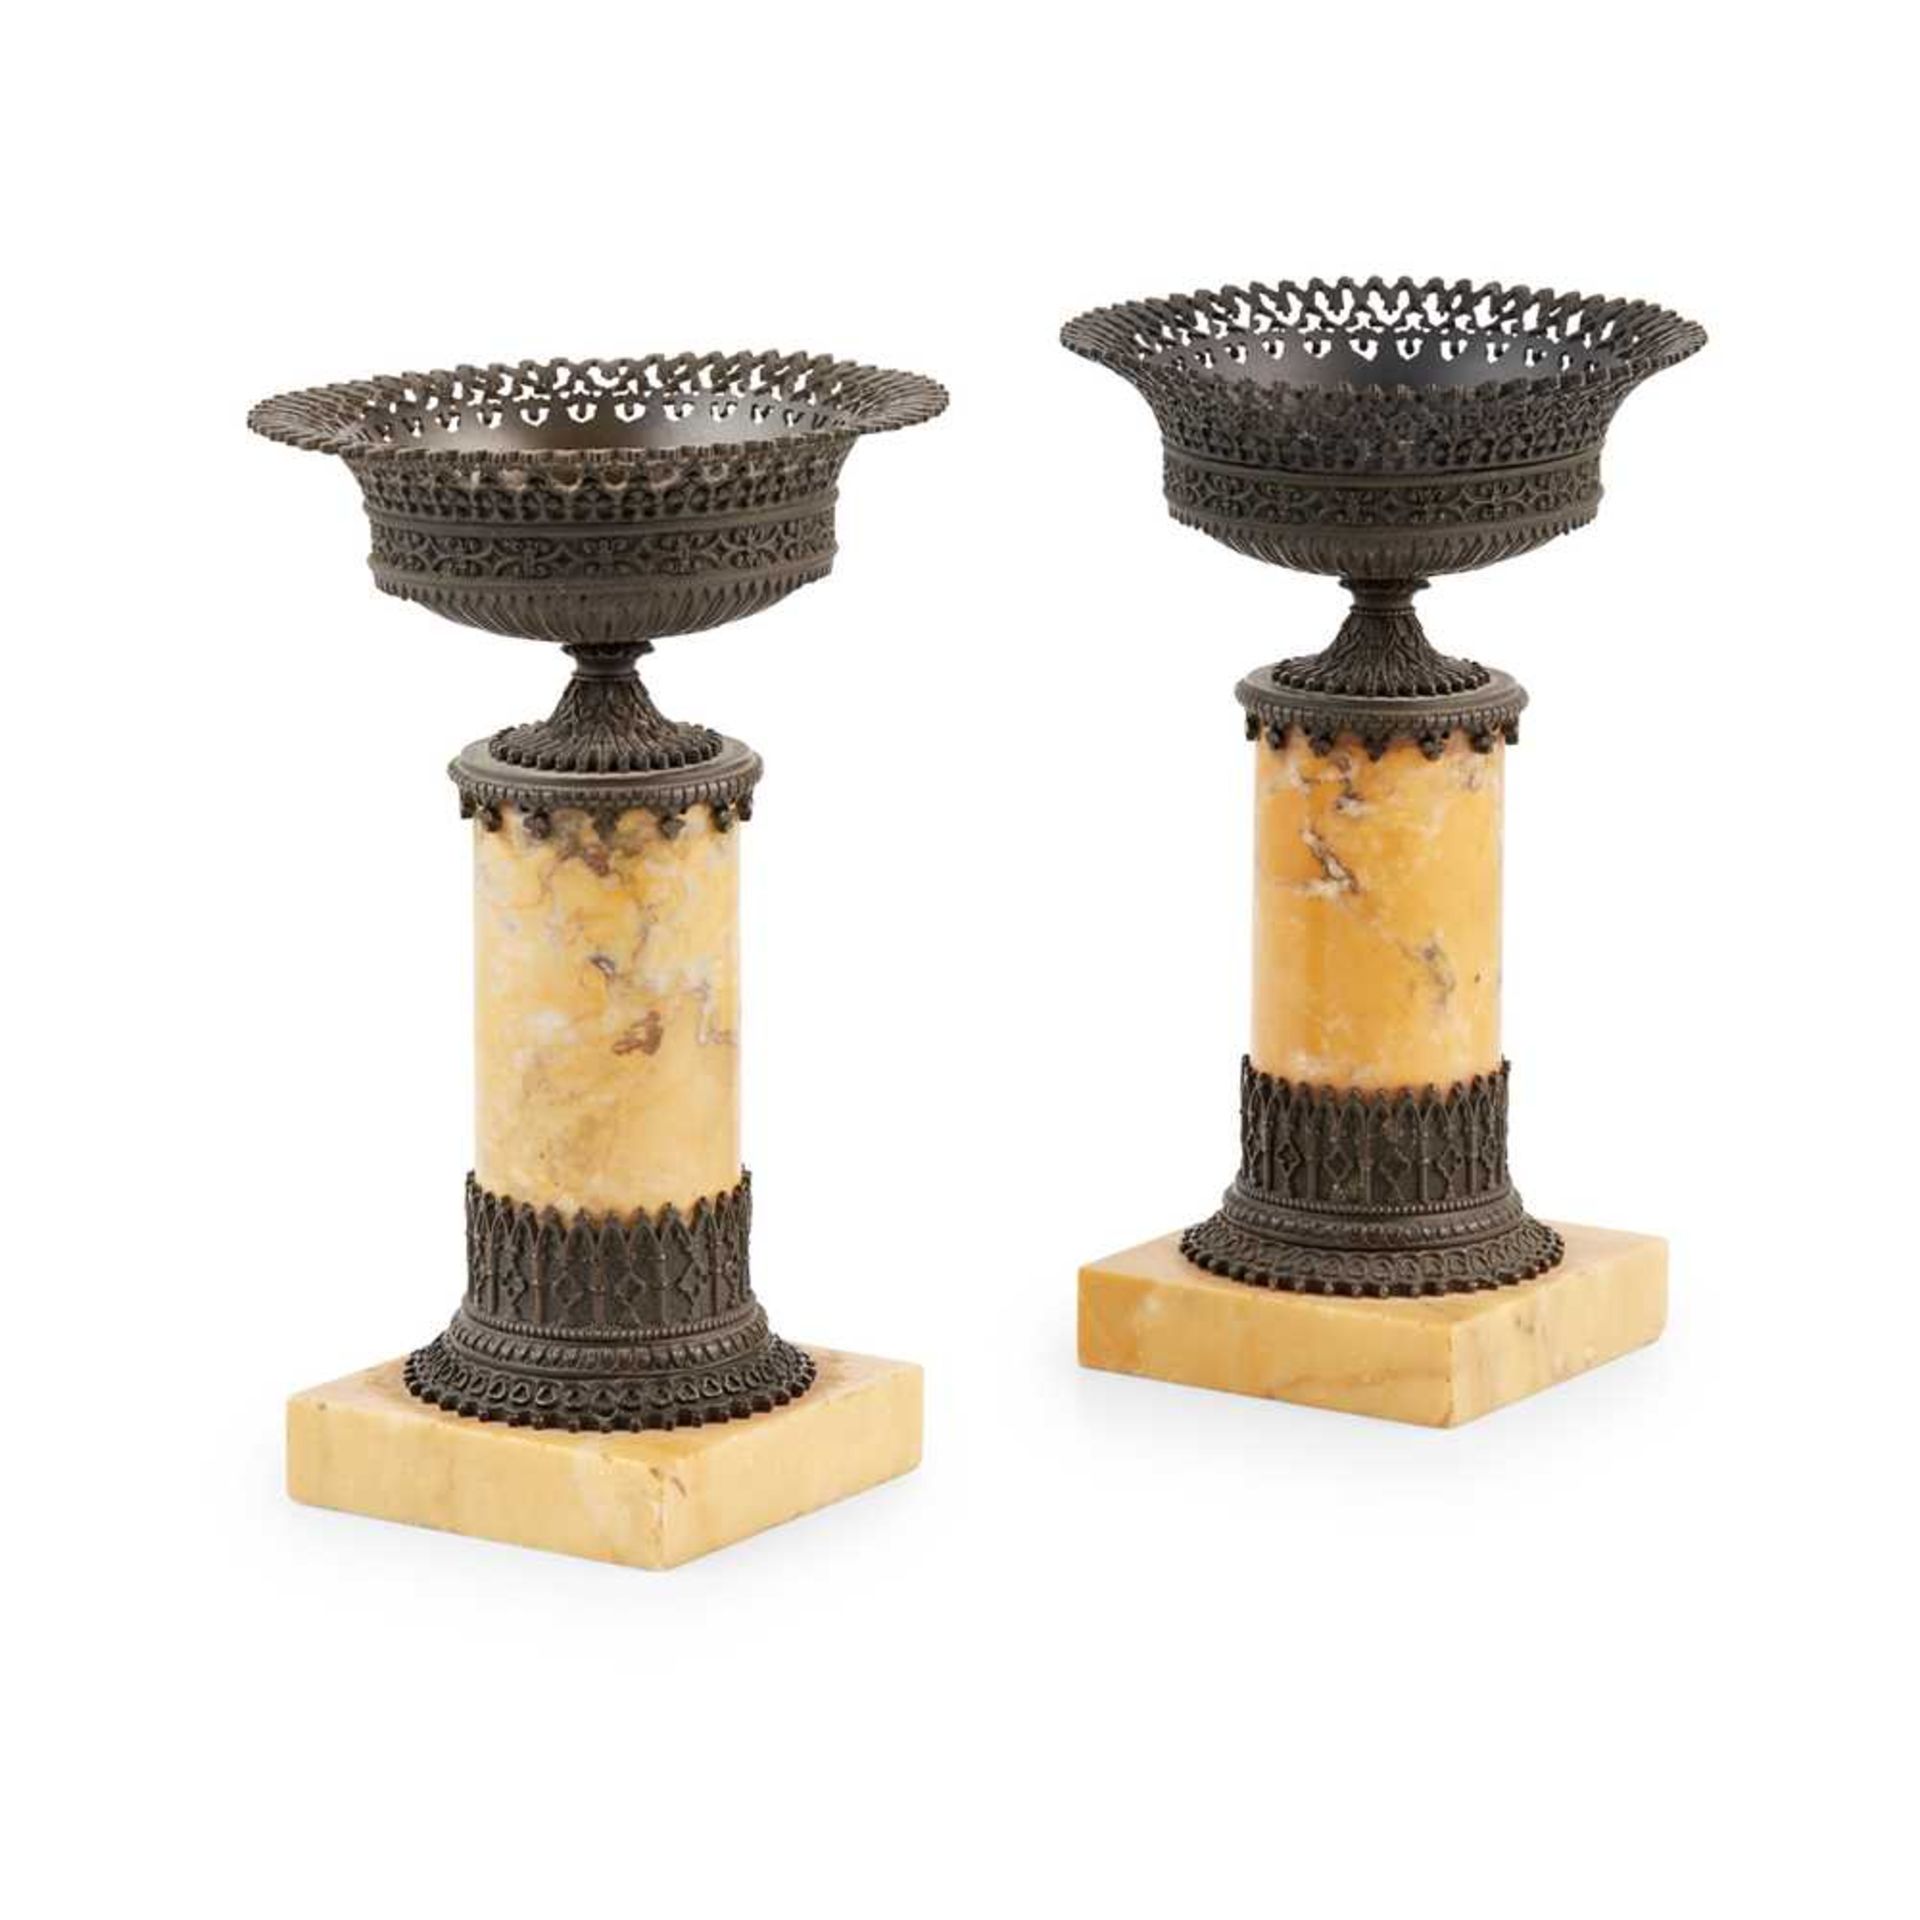 PAIR OF FRENCH EMPIRE BRONZE AND SIENA MARBLE TAZZAS EARLY 19TH CENTURY